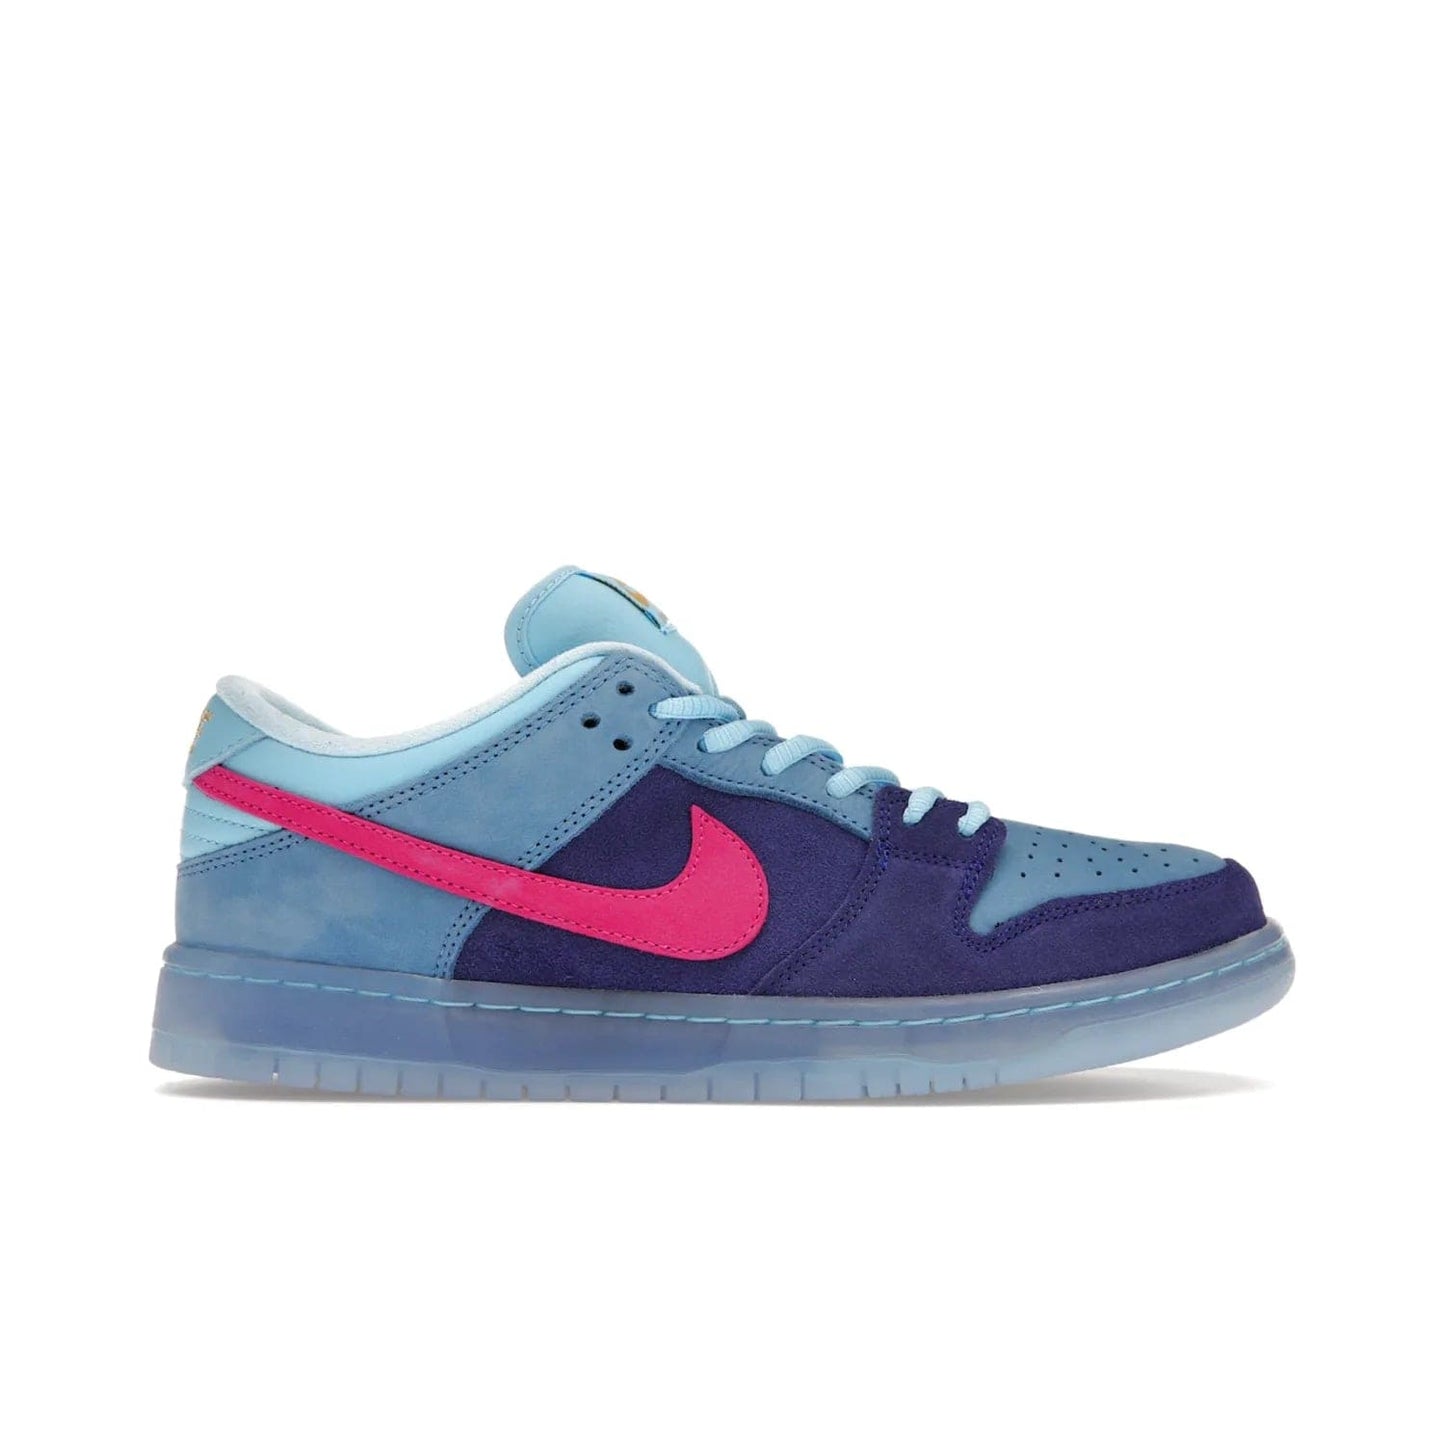 Nike SB Dunk Low Run The Jewels - Image 1 - Only at www.BallersClubKickz.com - The Nike SB Dunk Low Run The Jewels pays tribute to the Run the Jewels 3 album cover. It features a blue suede upper with pink suede accents, gold branding and 3 lace sets. RTJ insoles complete this limited edition sneaker. Get it now for your shoe collection.